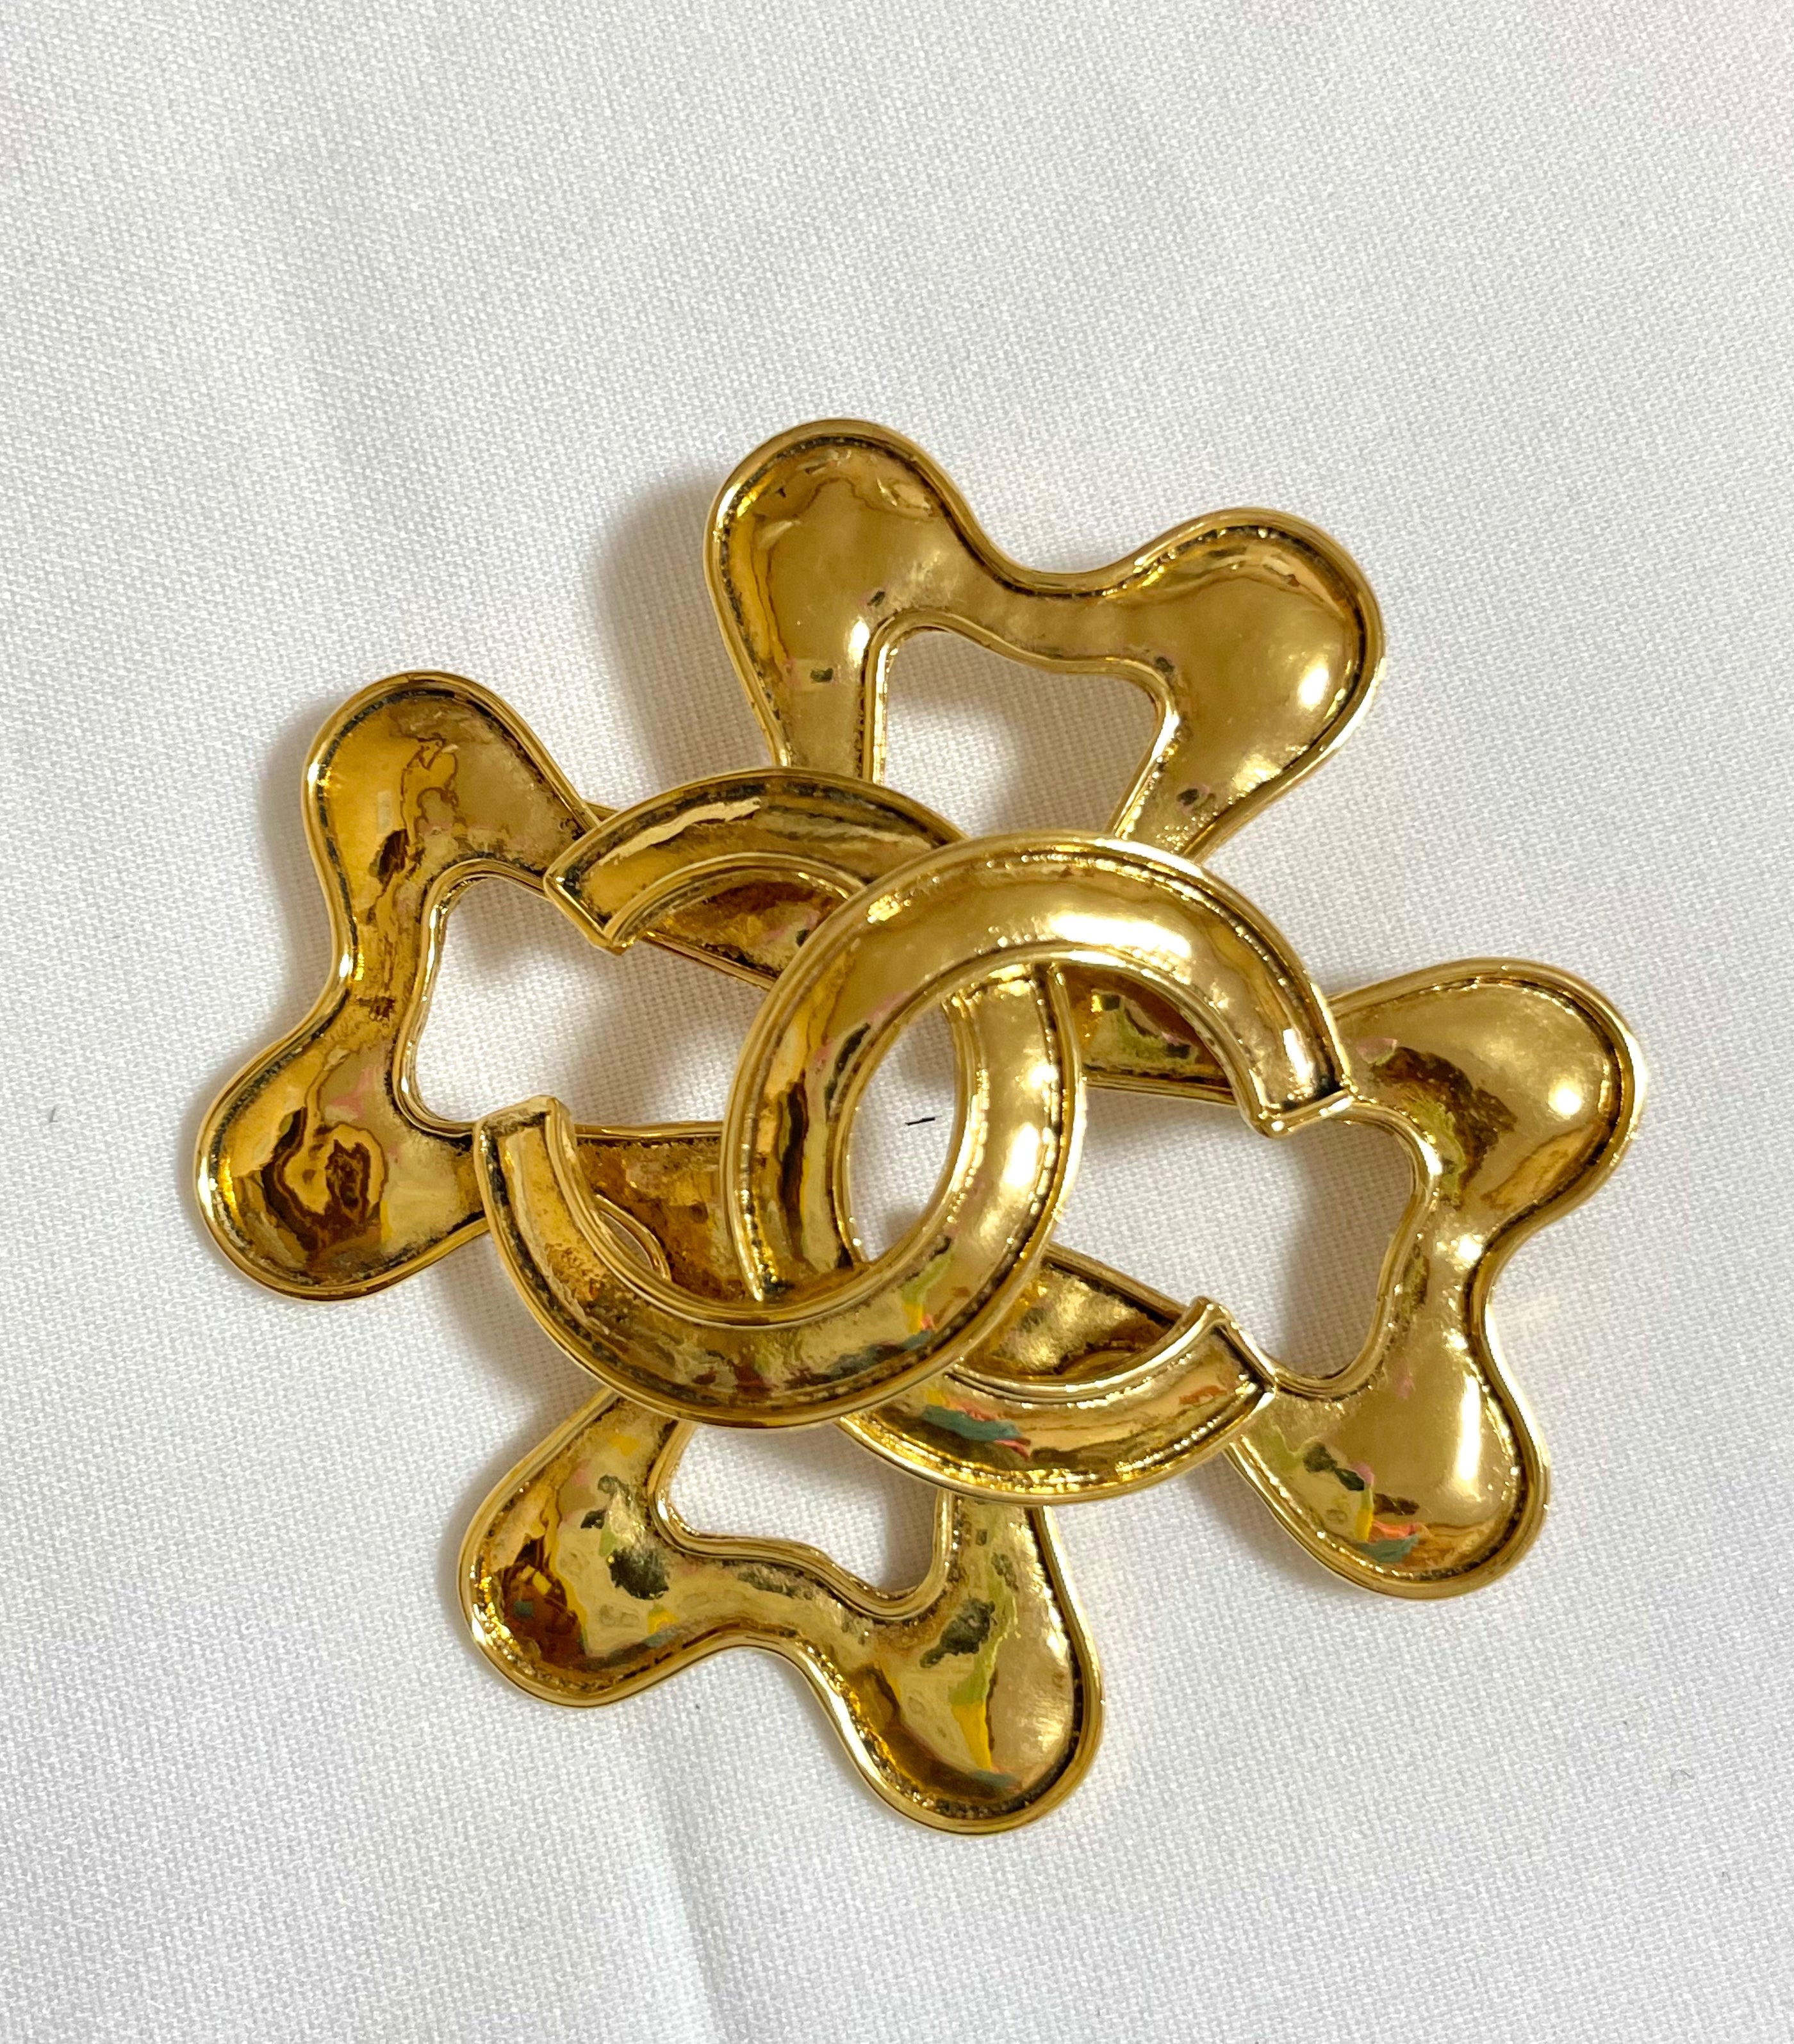 Vintage Chanel large flower clover brooch with CC mark. Gorgeous masterpiece jewelry. 0408244